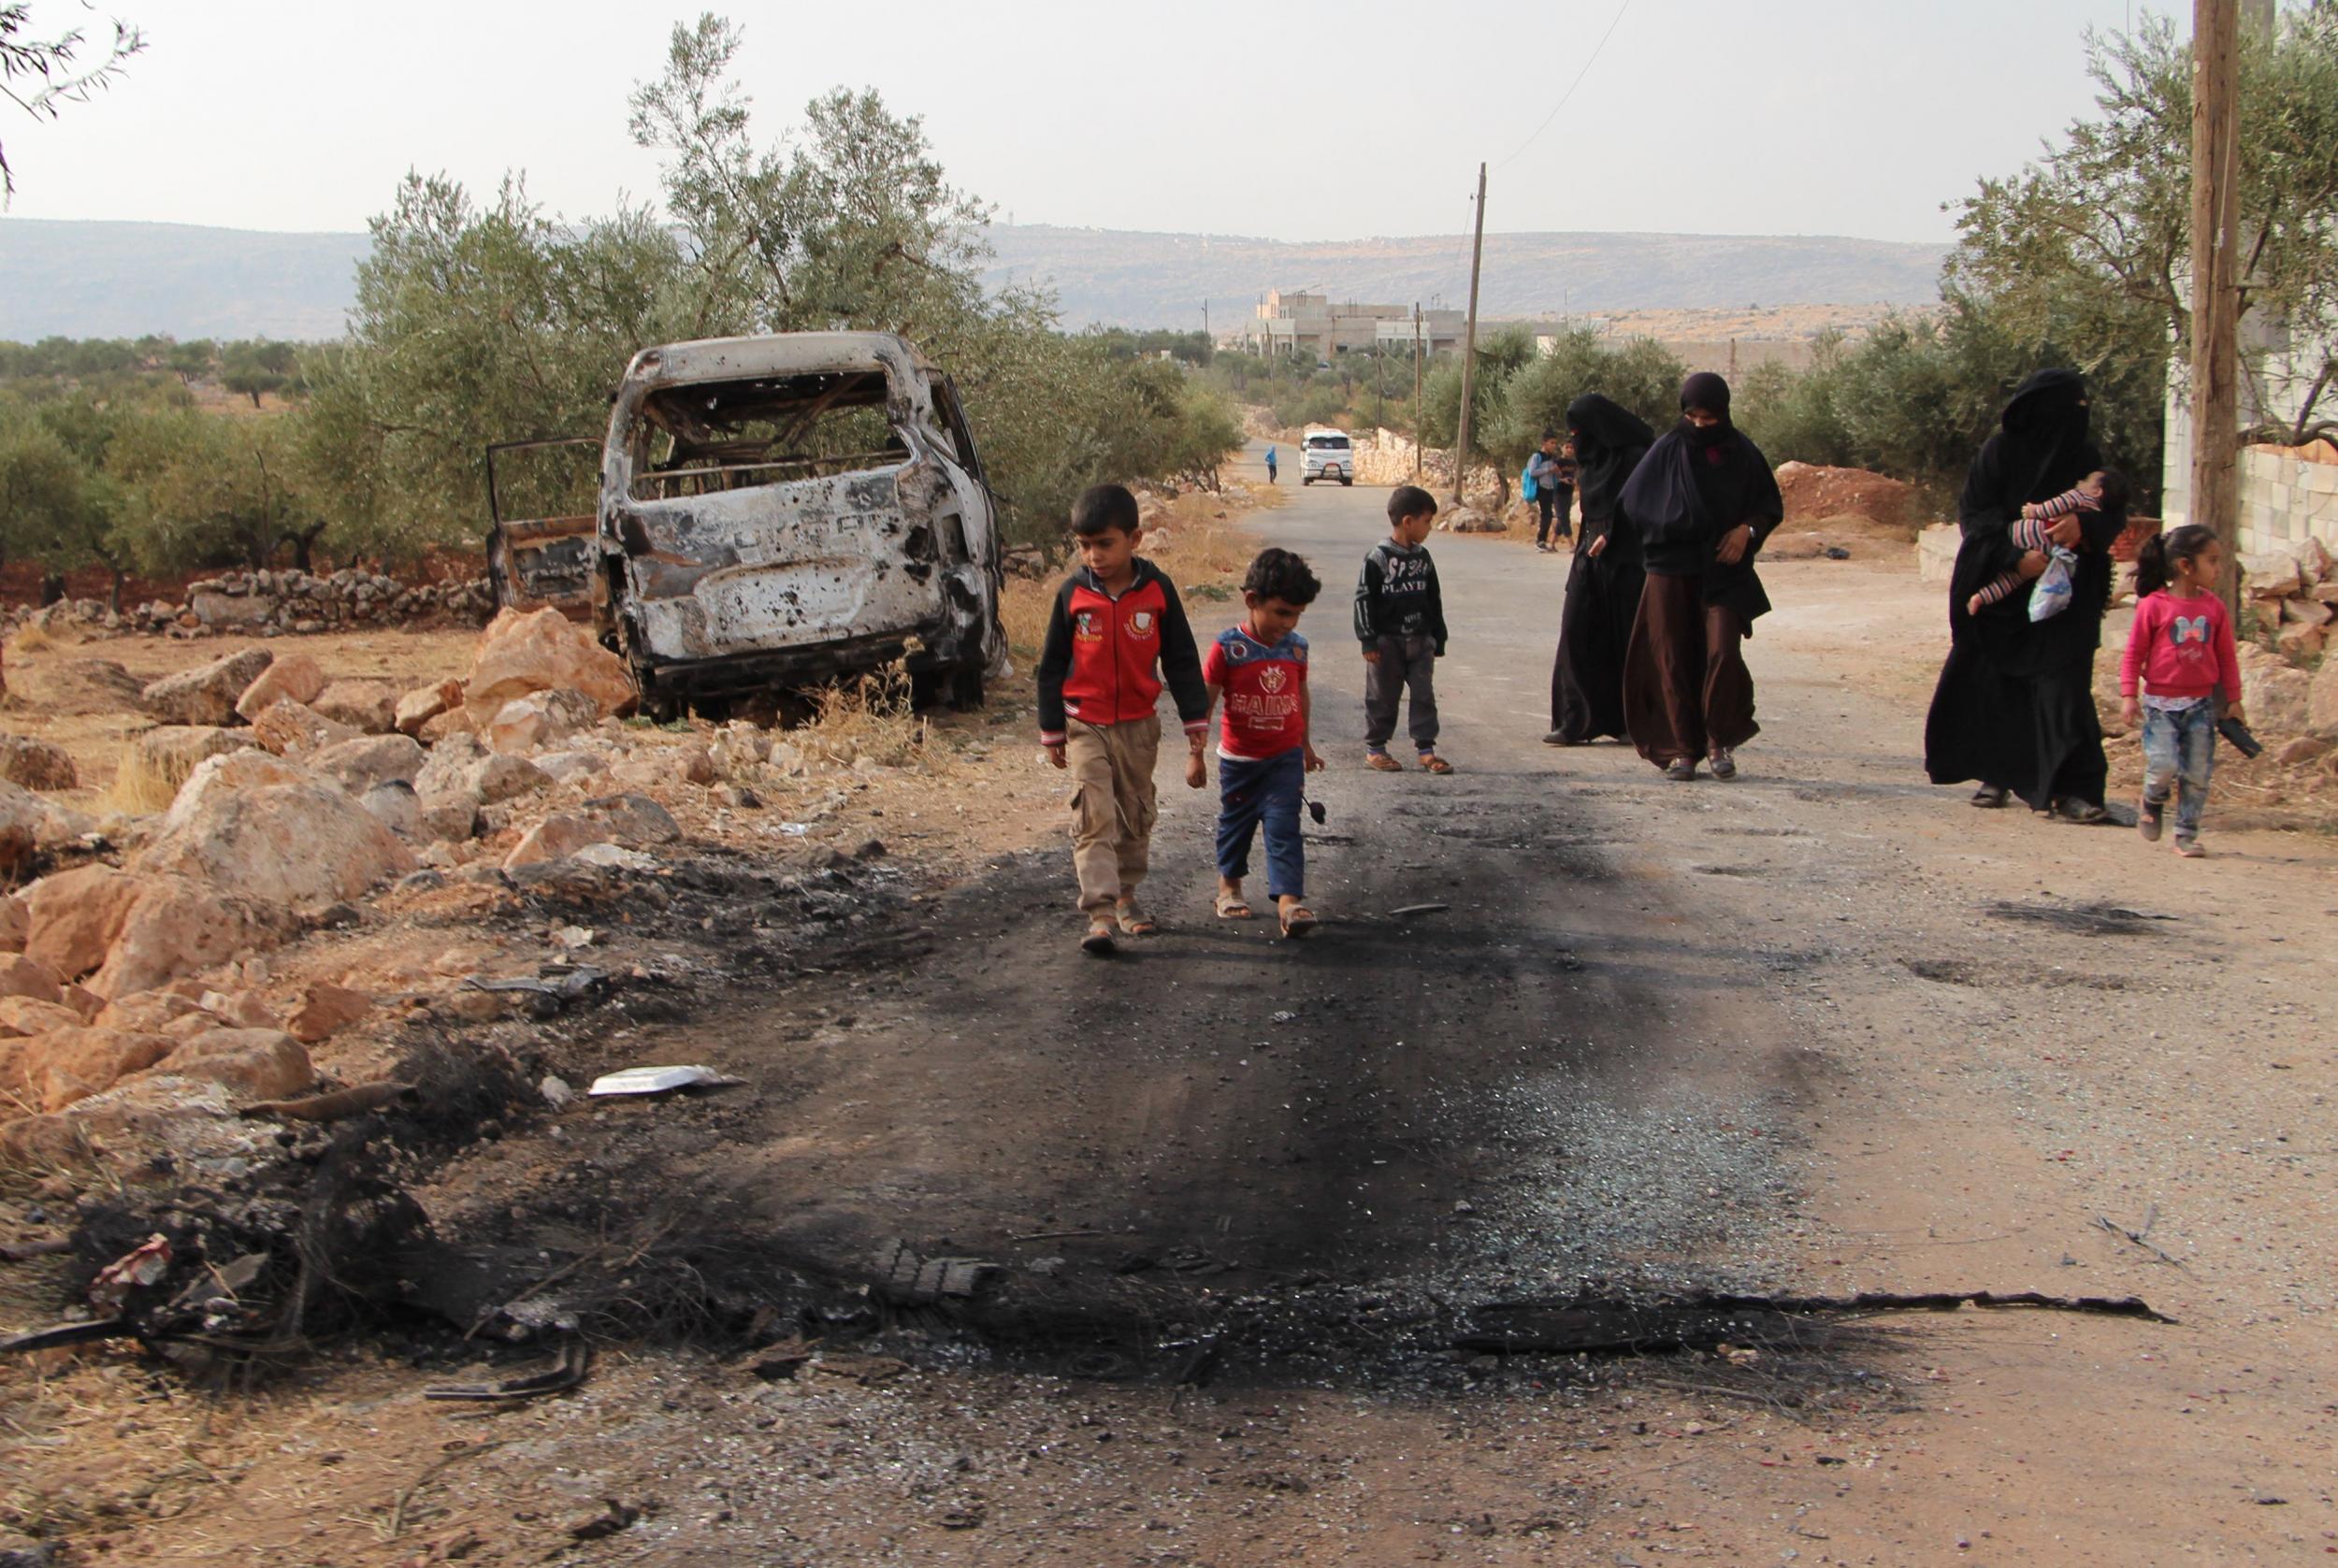 Locals walk past a damaged van at the alleged site where Isis leader was killed